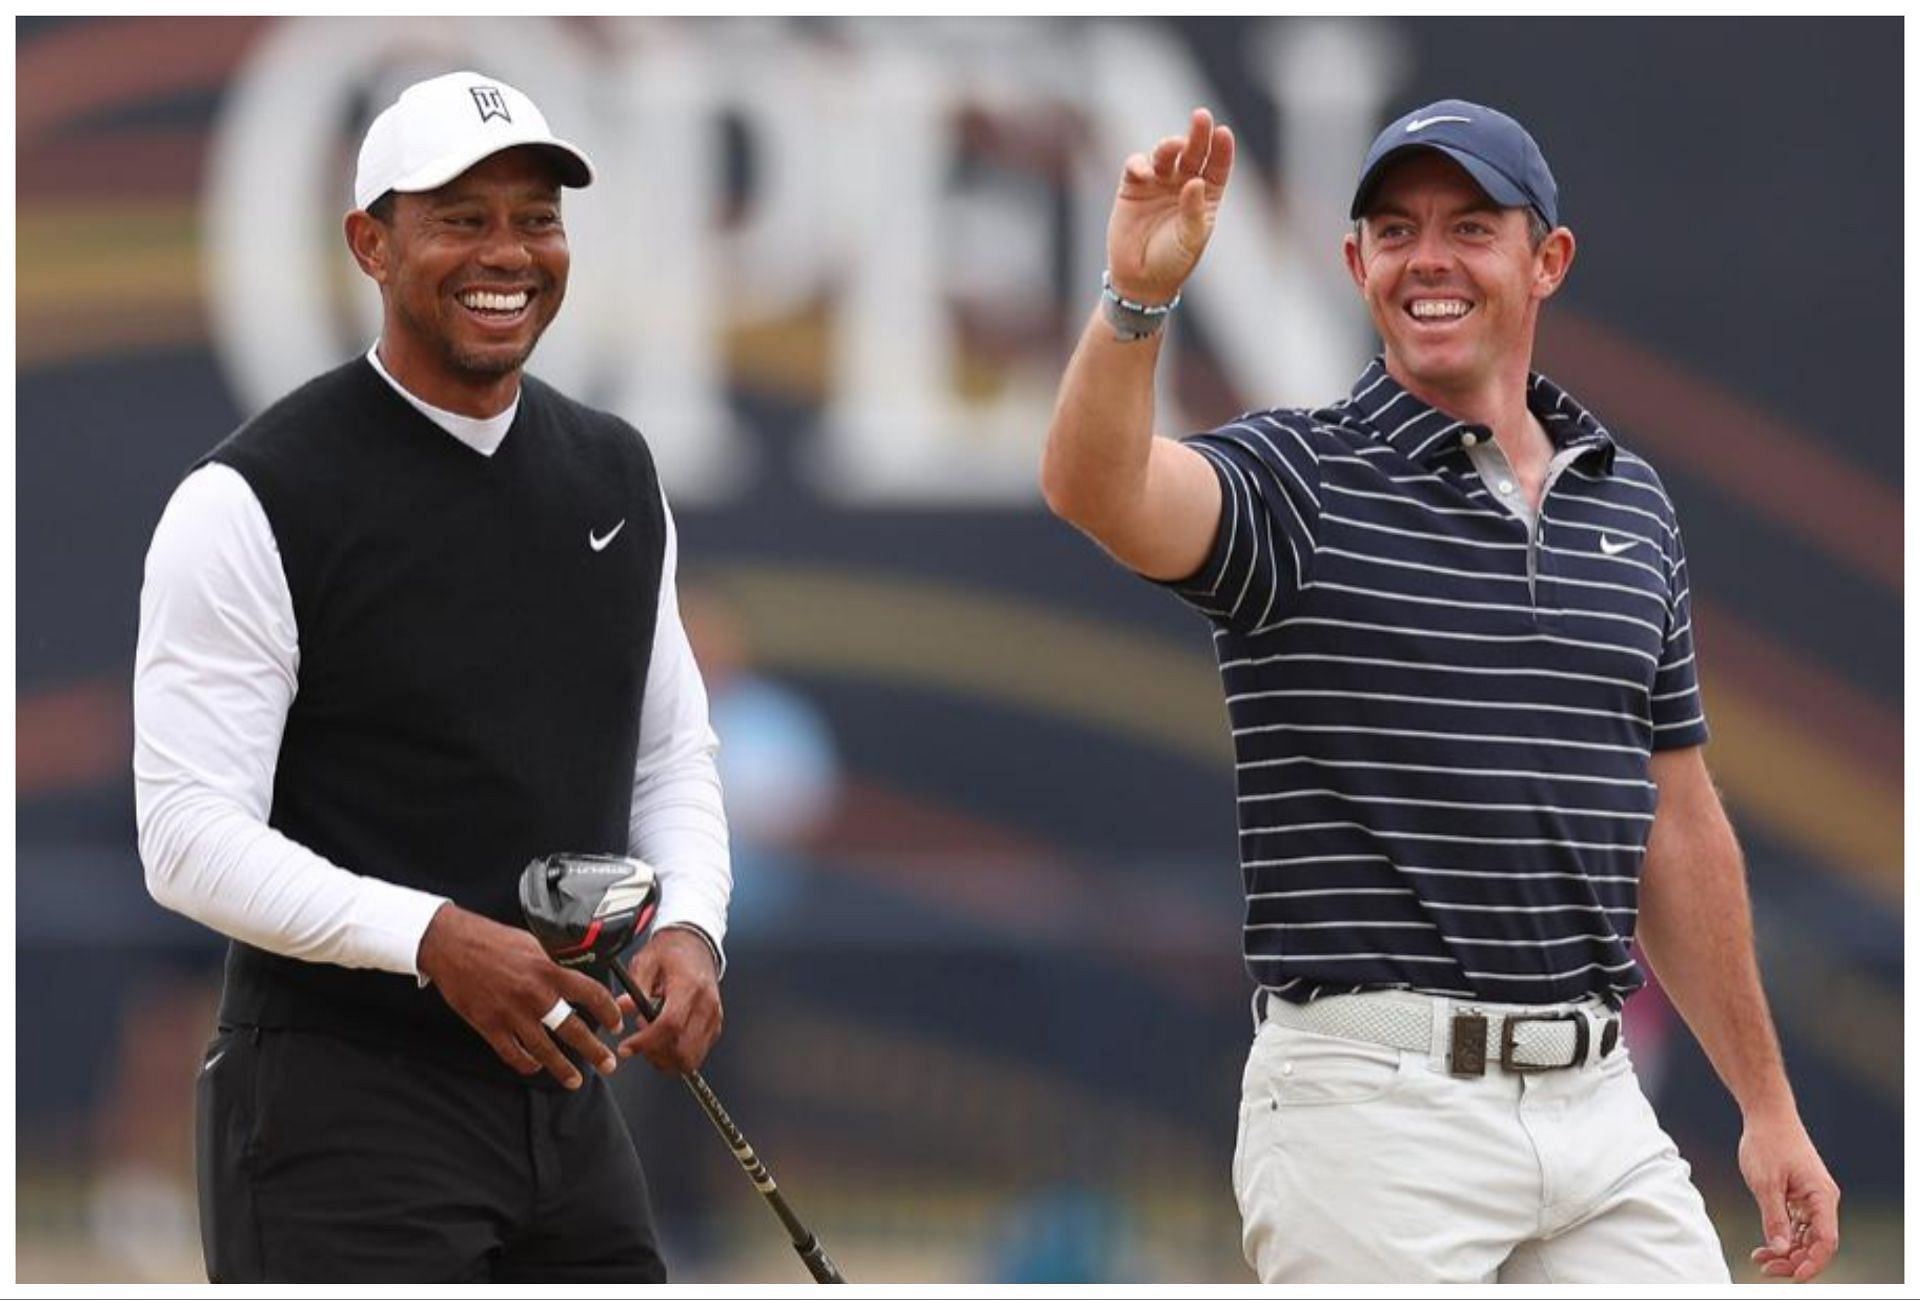 Tiger Woods &amp; Rory Mcllroy